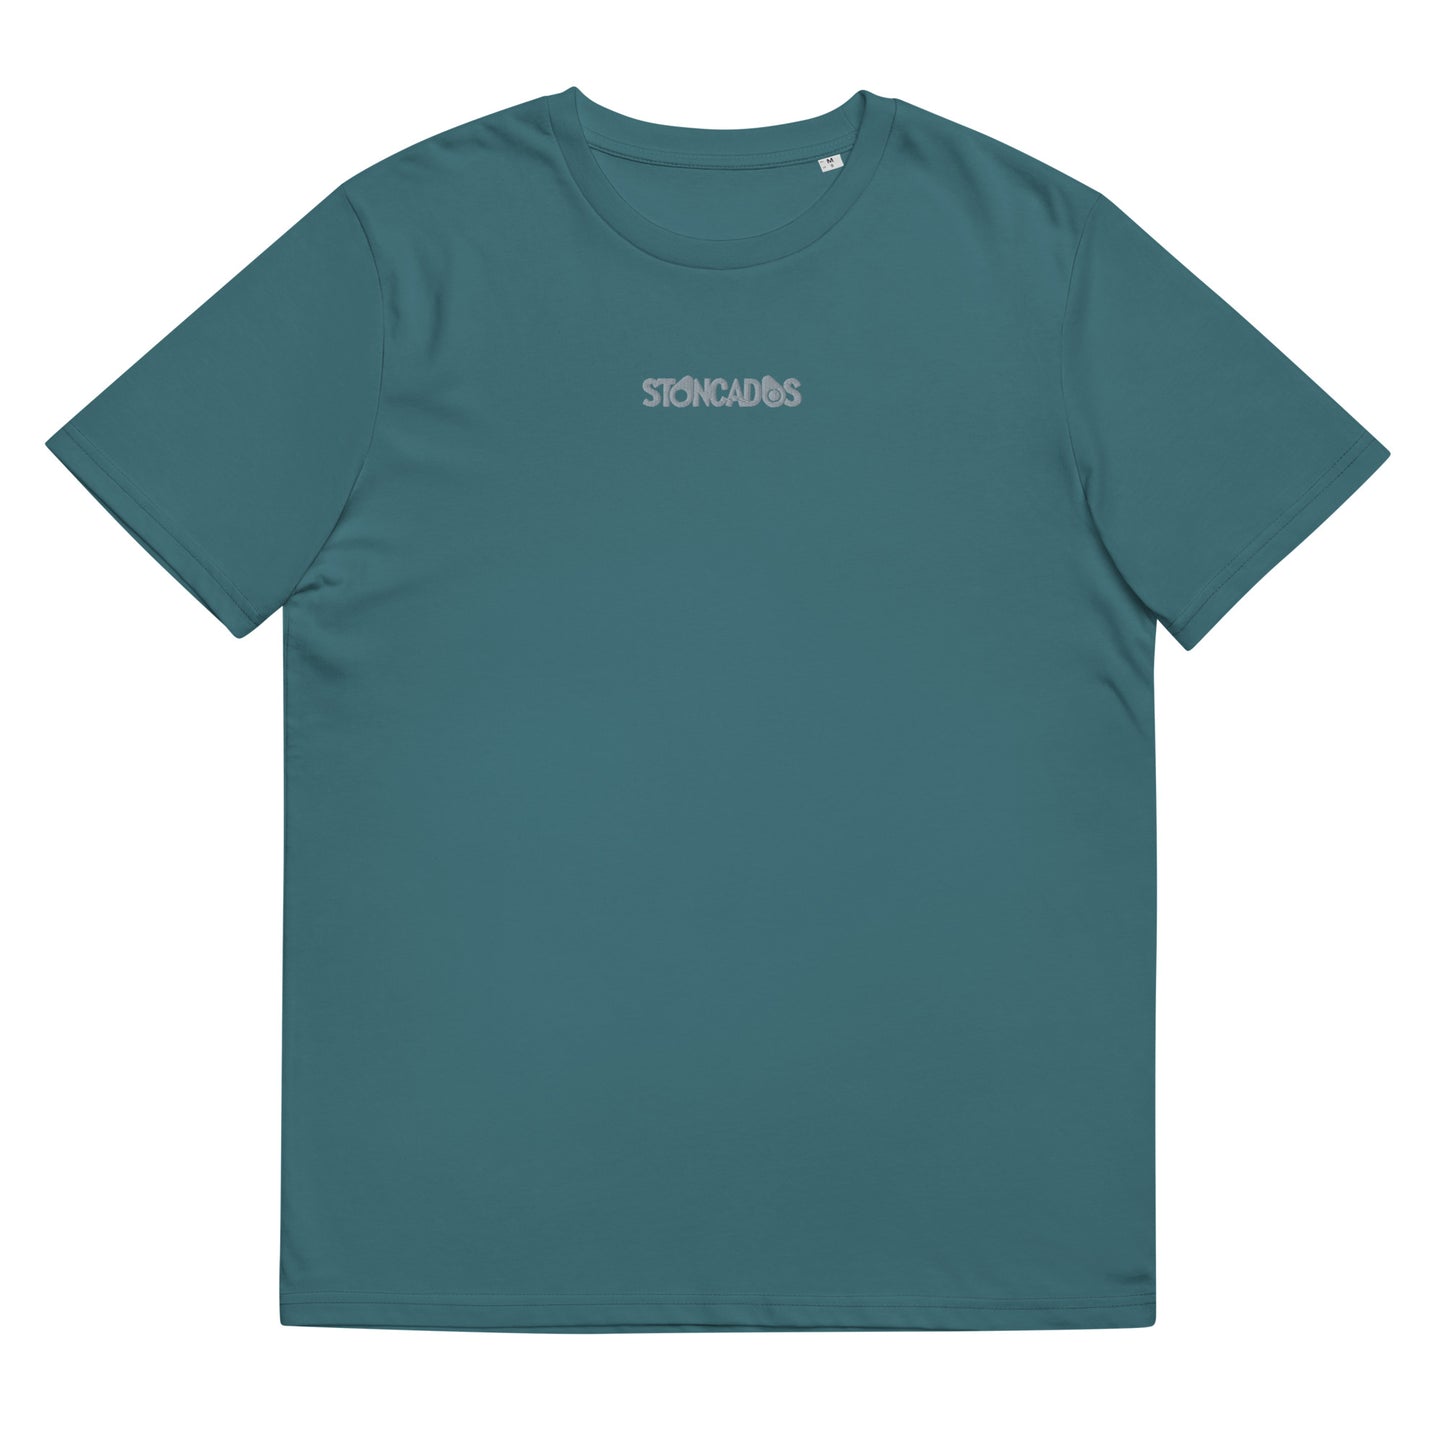 Unisex organic cotton t-shirt REAR PRINT + EMBROIDERED LOGO feat Stoncados